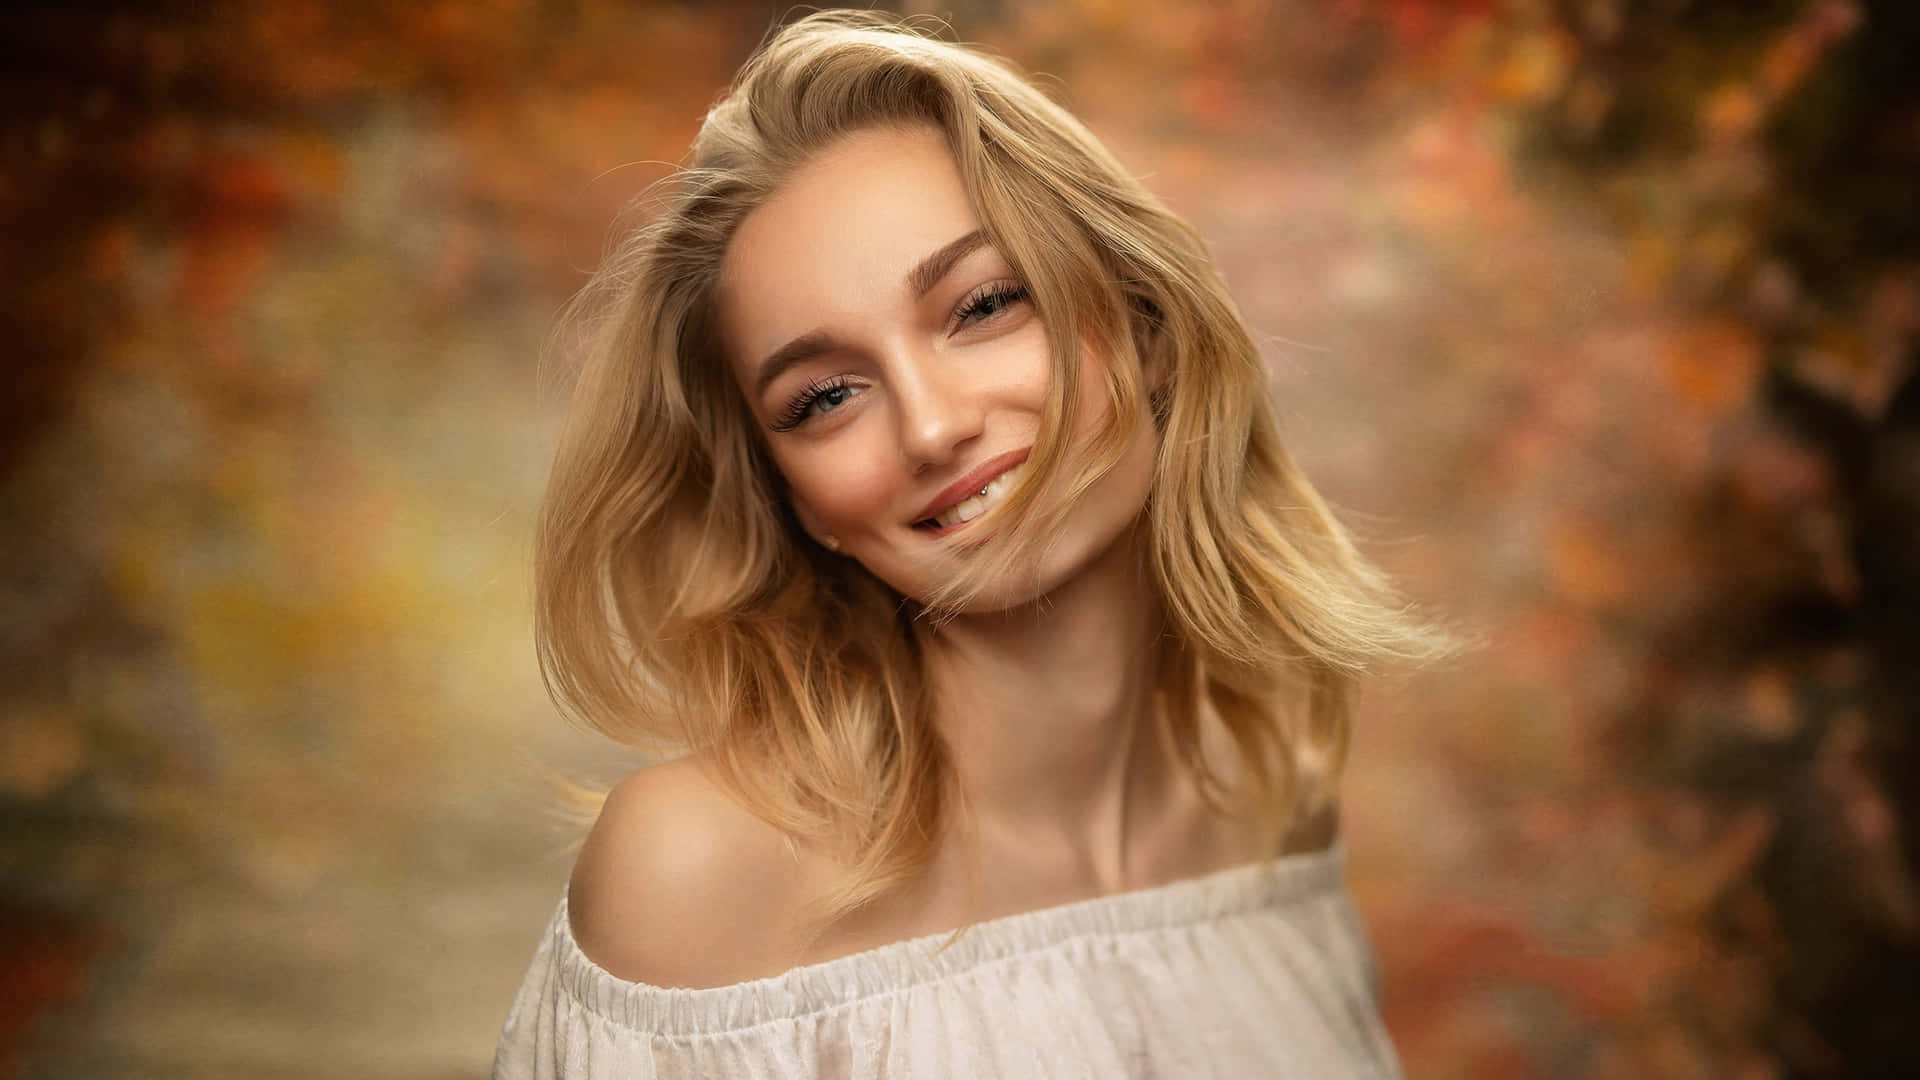 Blonde Teen Girl Smiling Picture